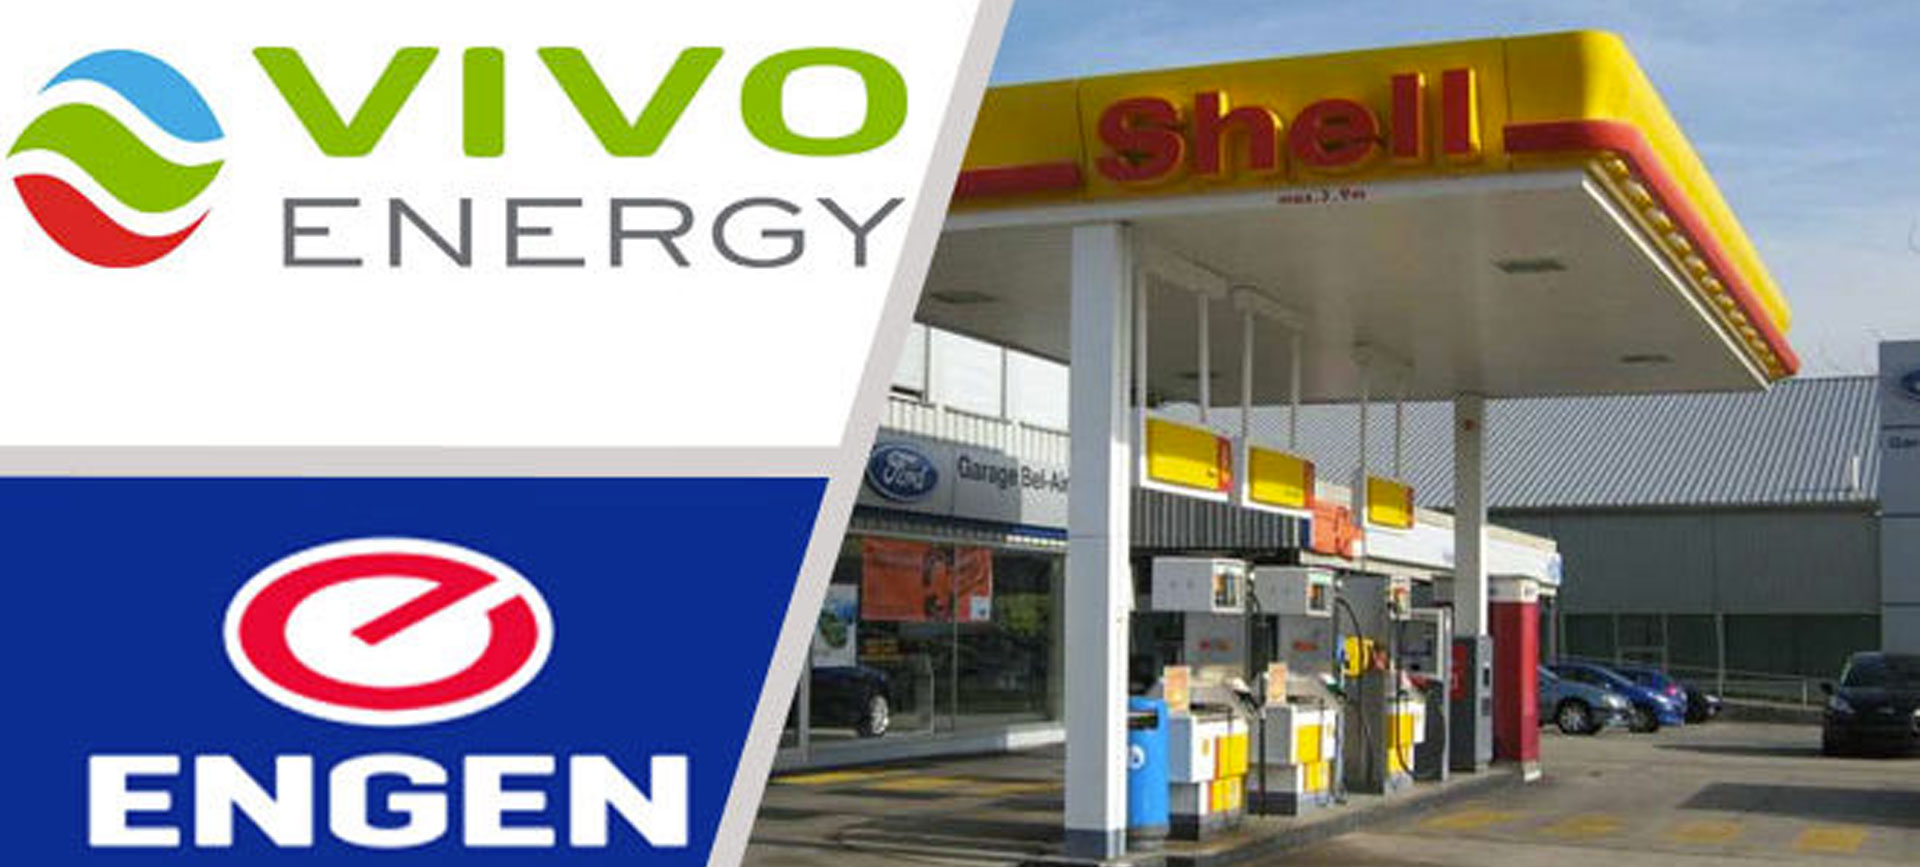 VIVO Energy drags to Court over the sale of ‘Water Mix Fuel’